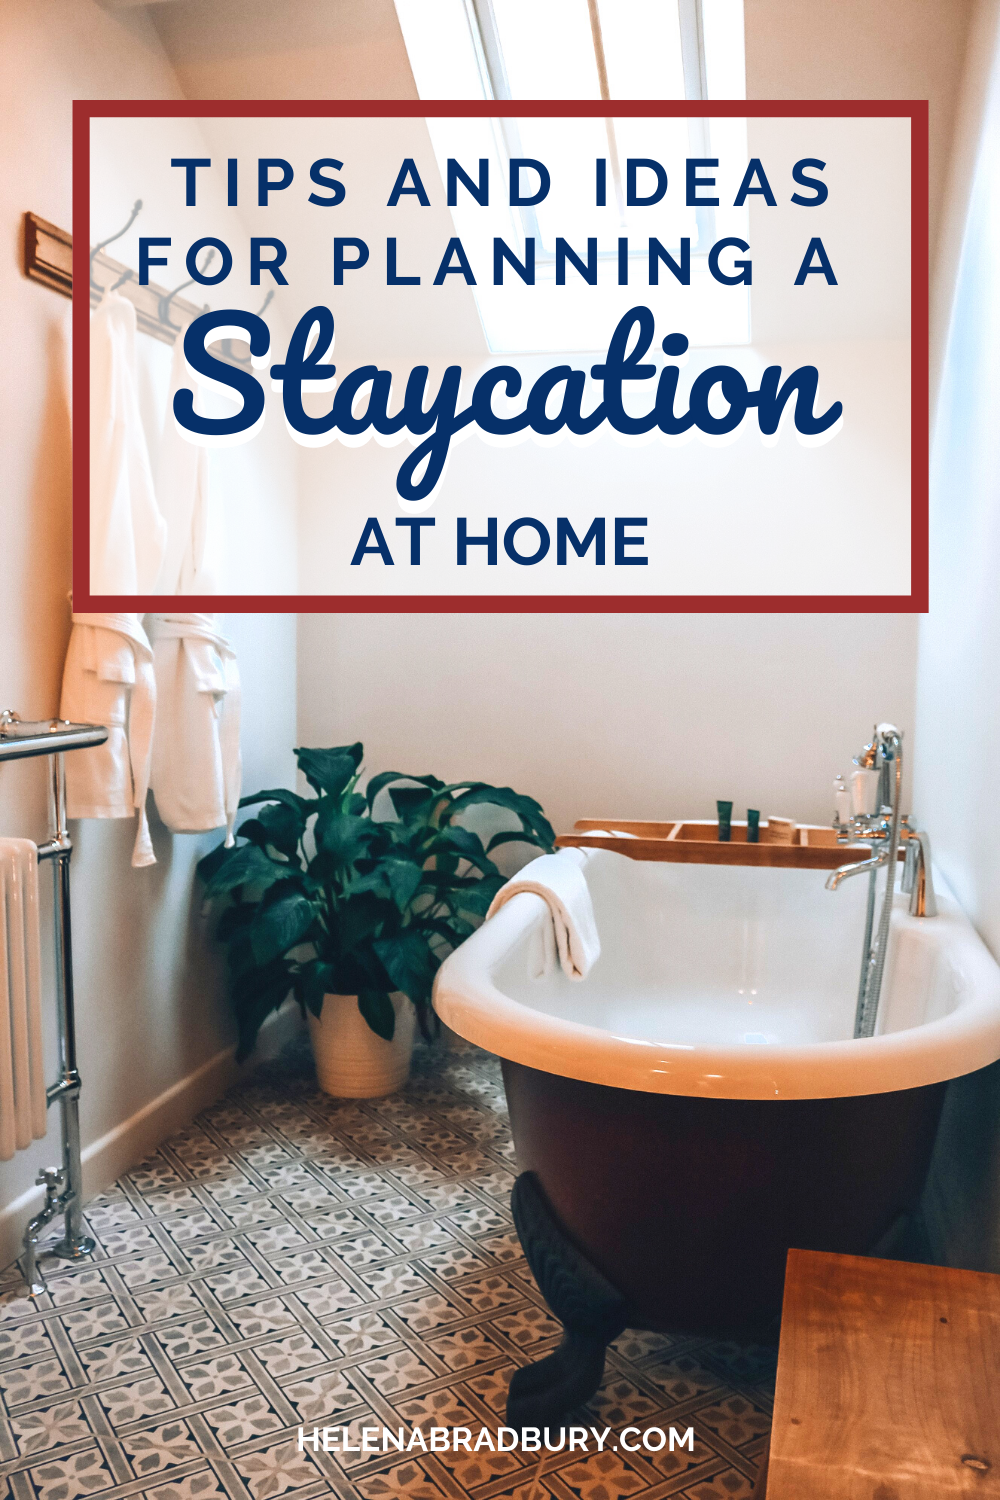 Tips and Ideas to help you plan a staycation at home | Helena Bradbury Travel blog how to have a holiday at home | how to have a staycation | planning a staycation | staycation ideas | staycation tips | how to have a staycation at home | best stayca…